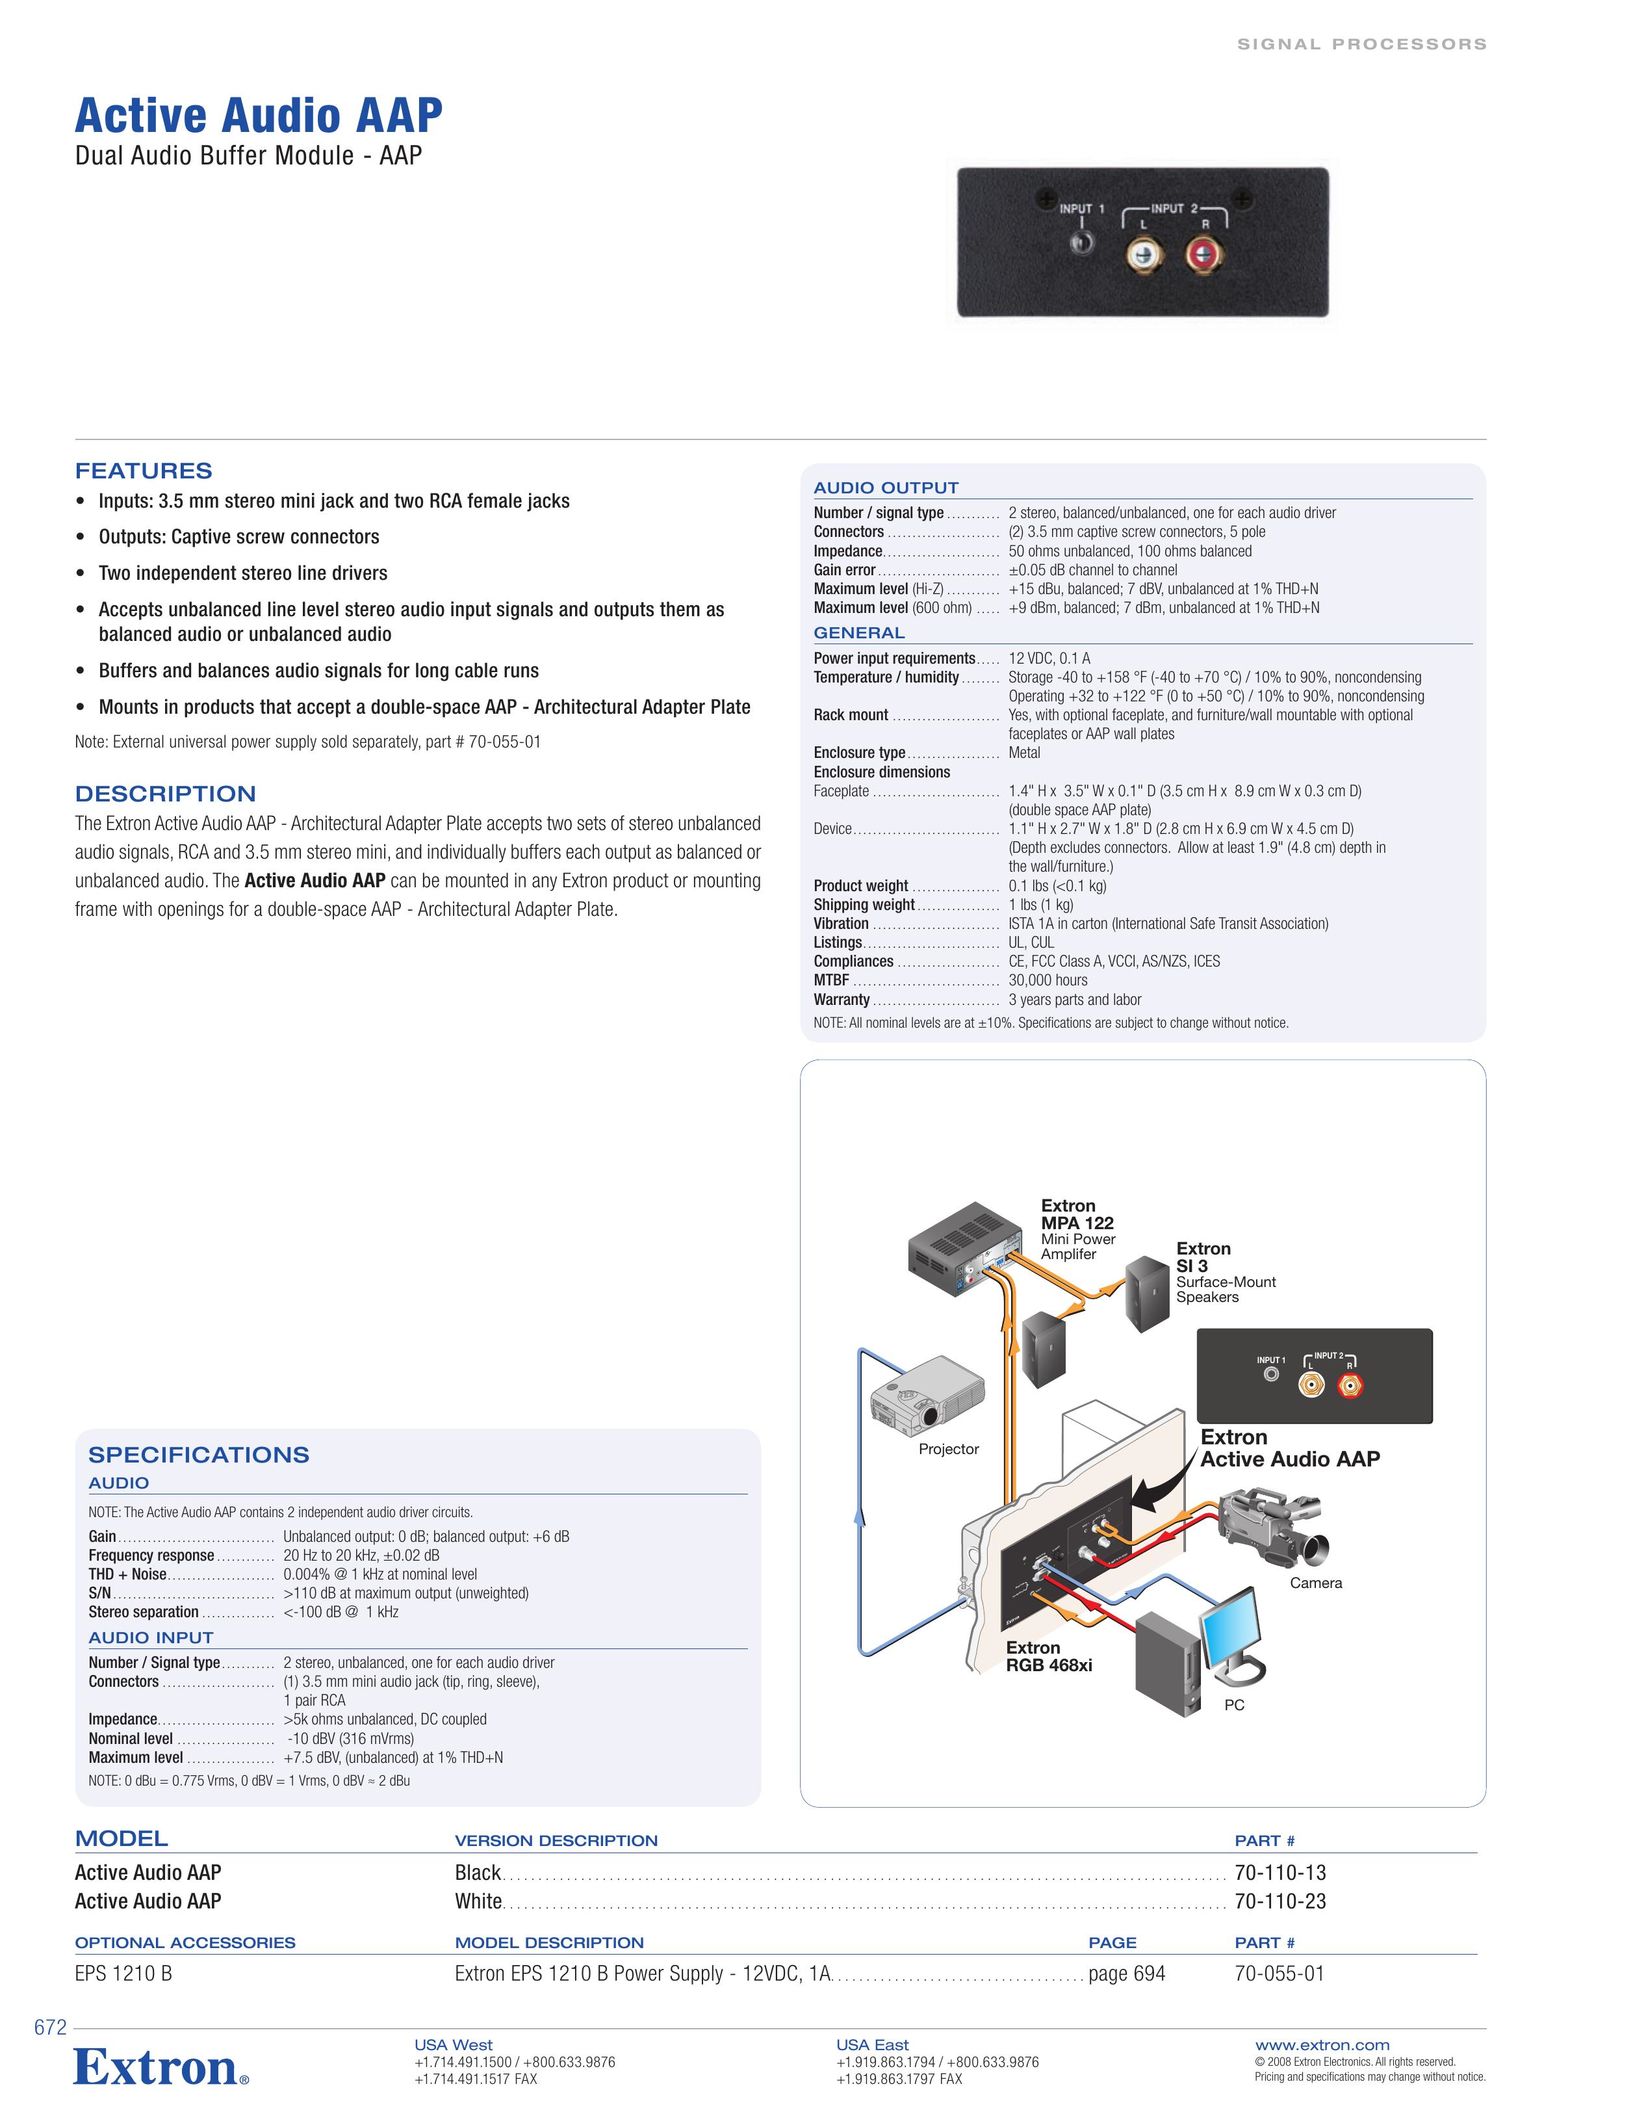 Extron electronic Active Audio AAP Network Card User Manual